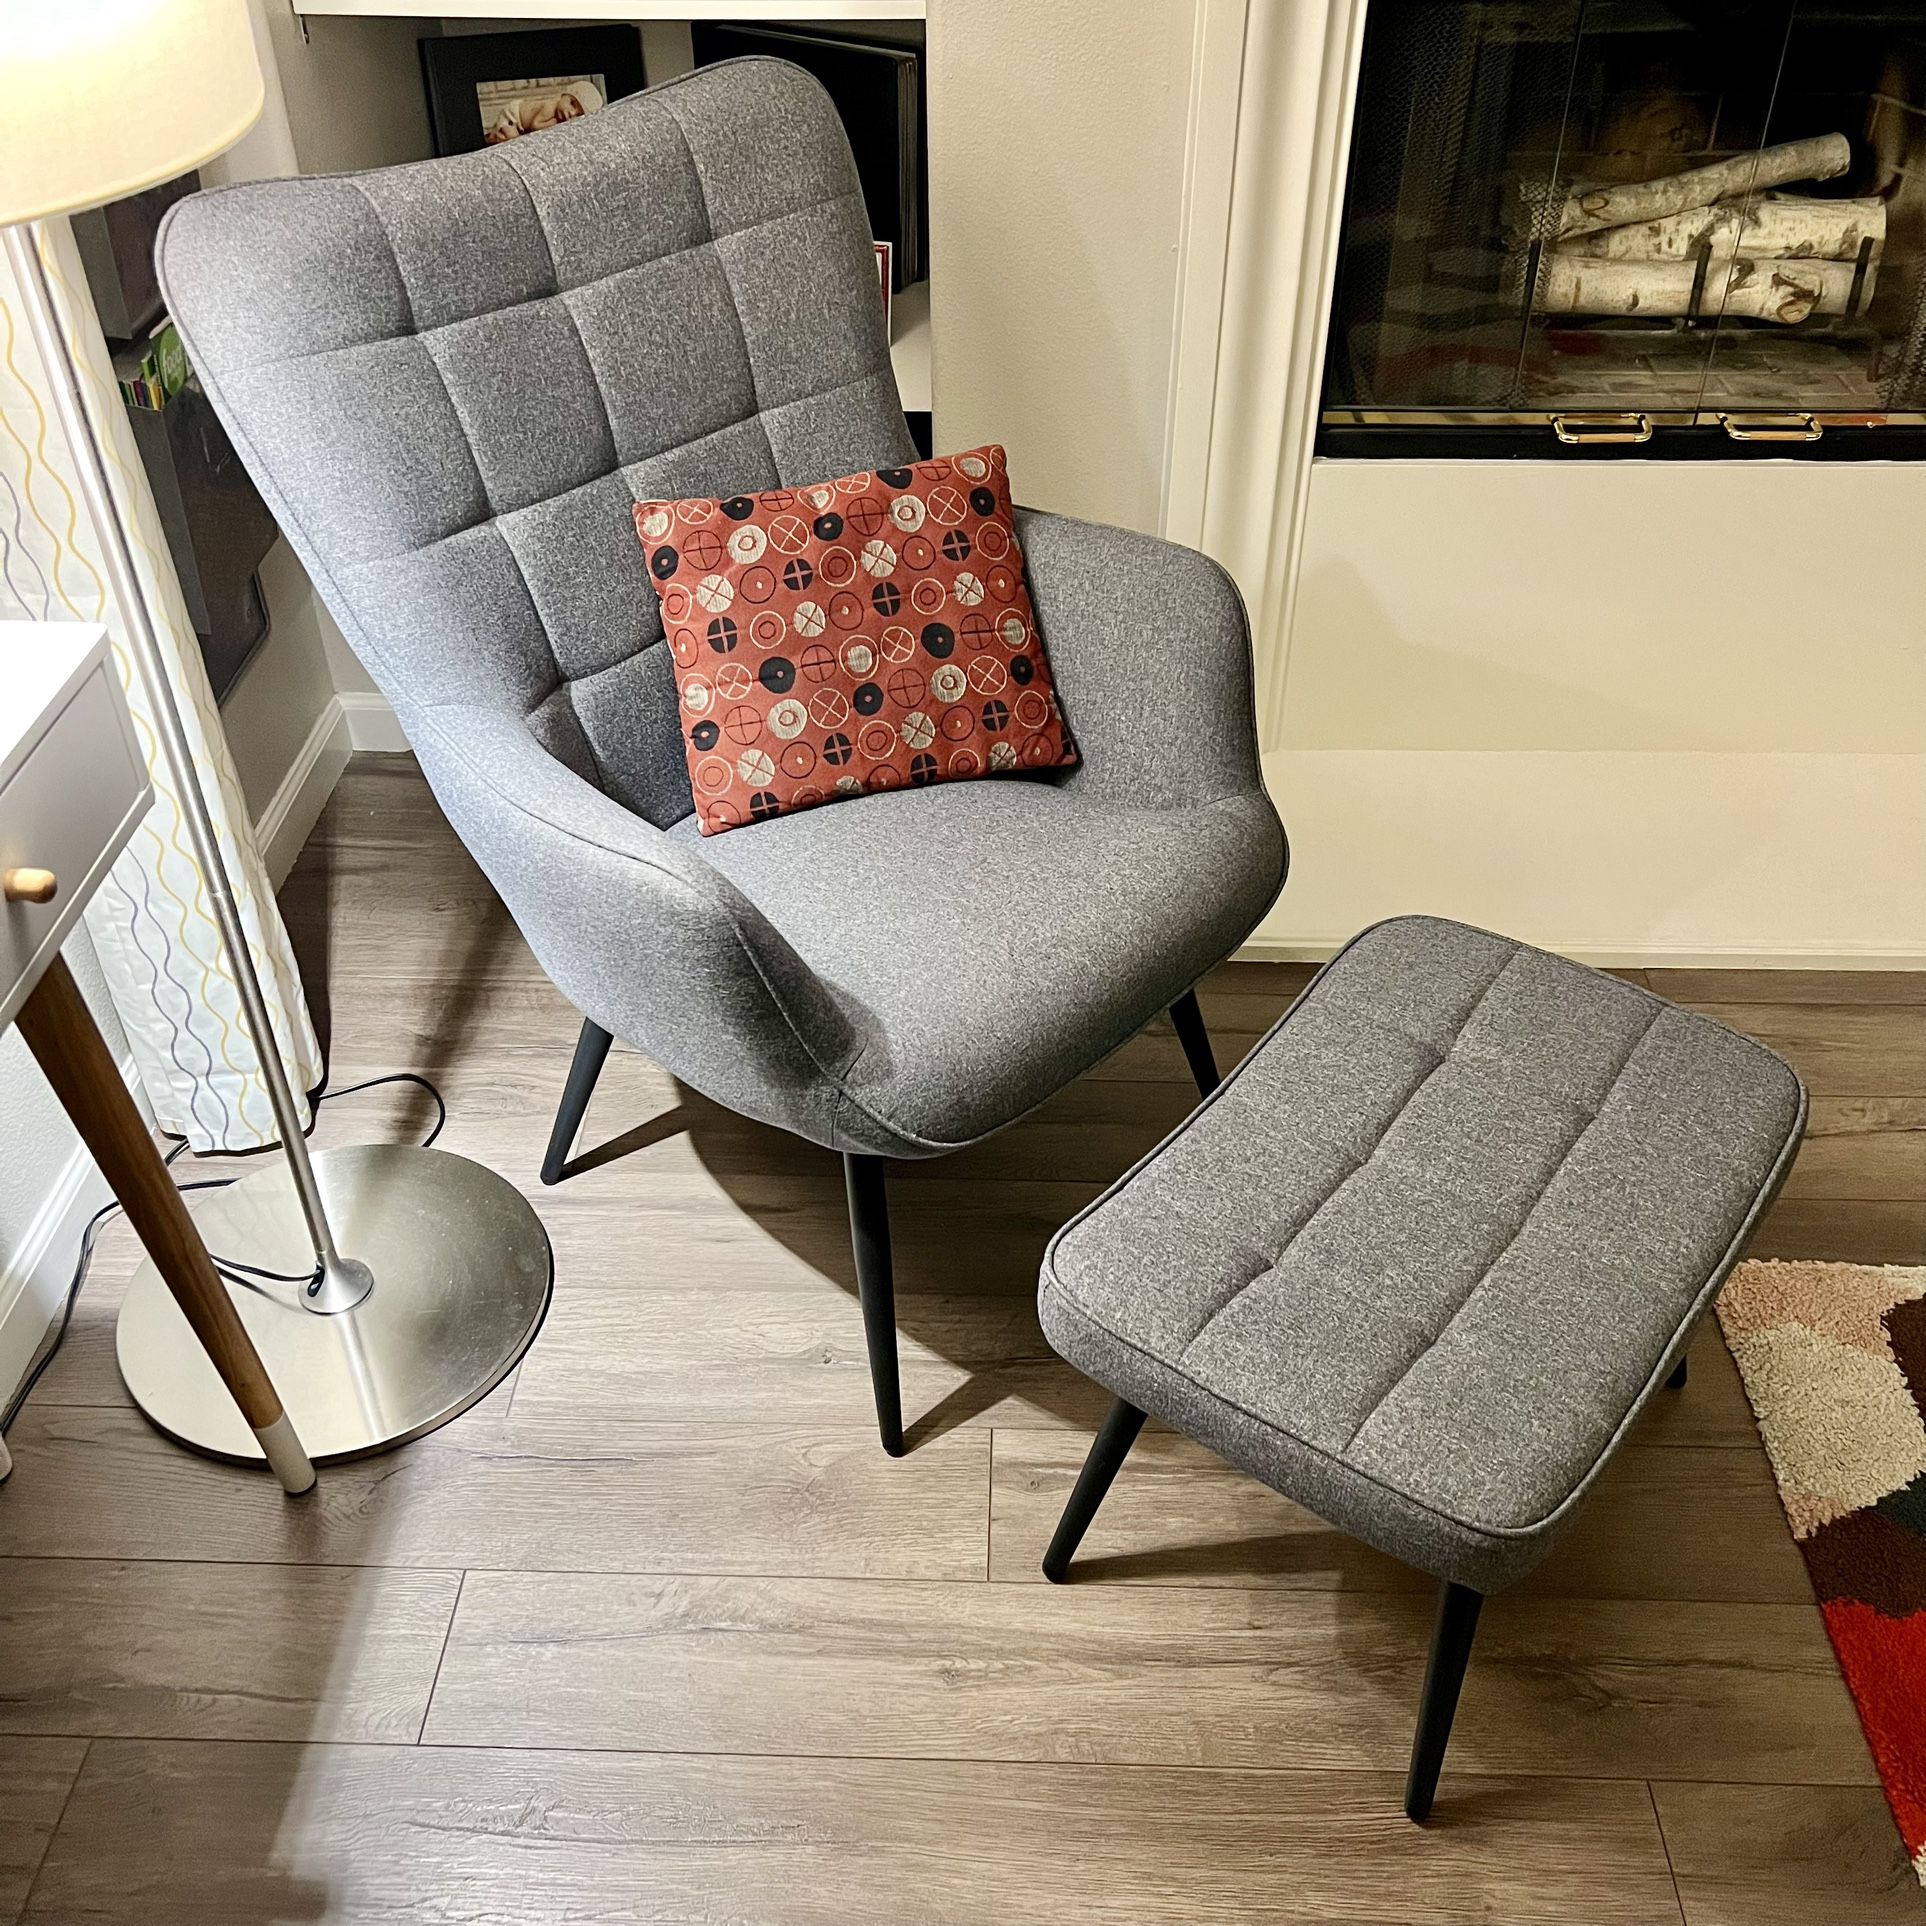 Mid century modern style chair and ottoman